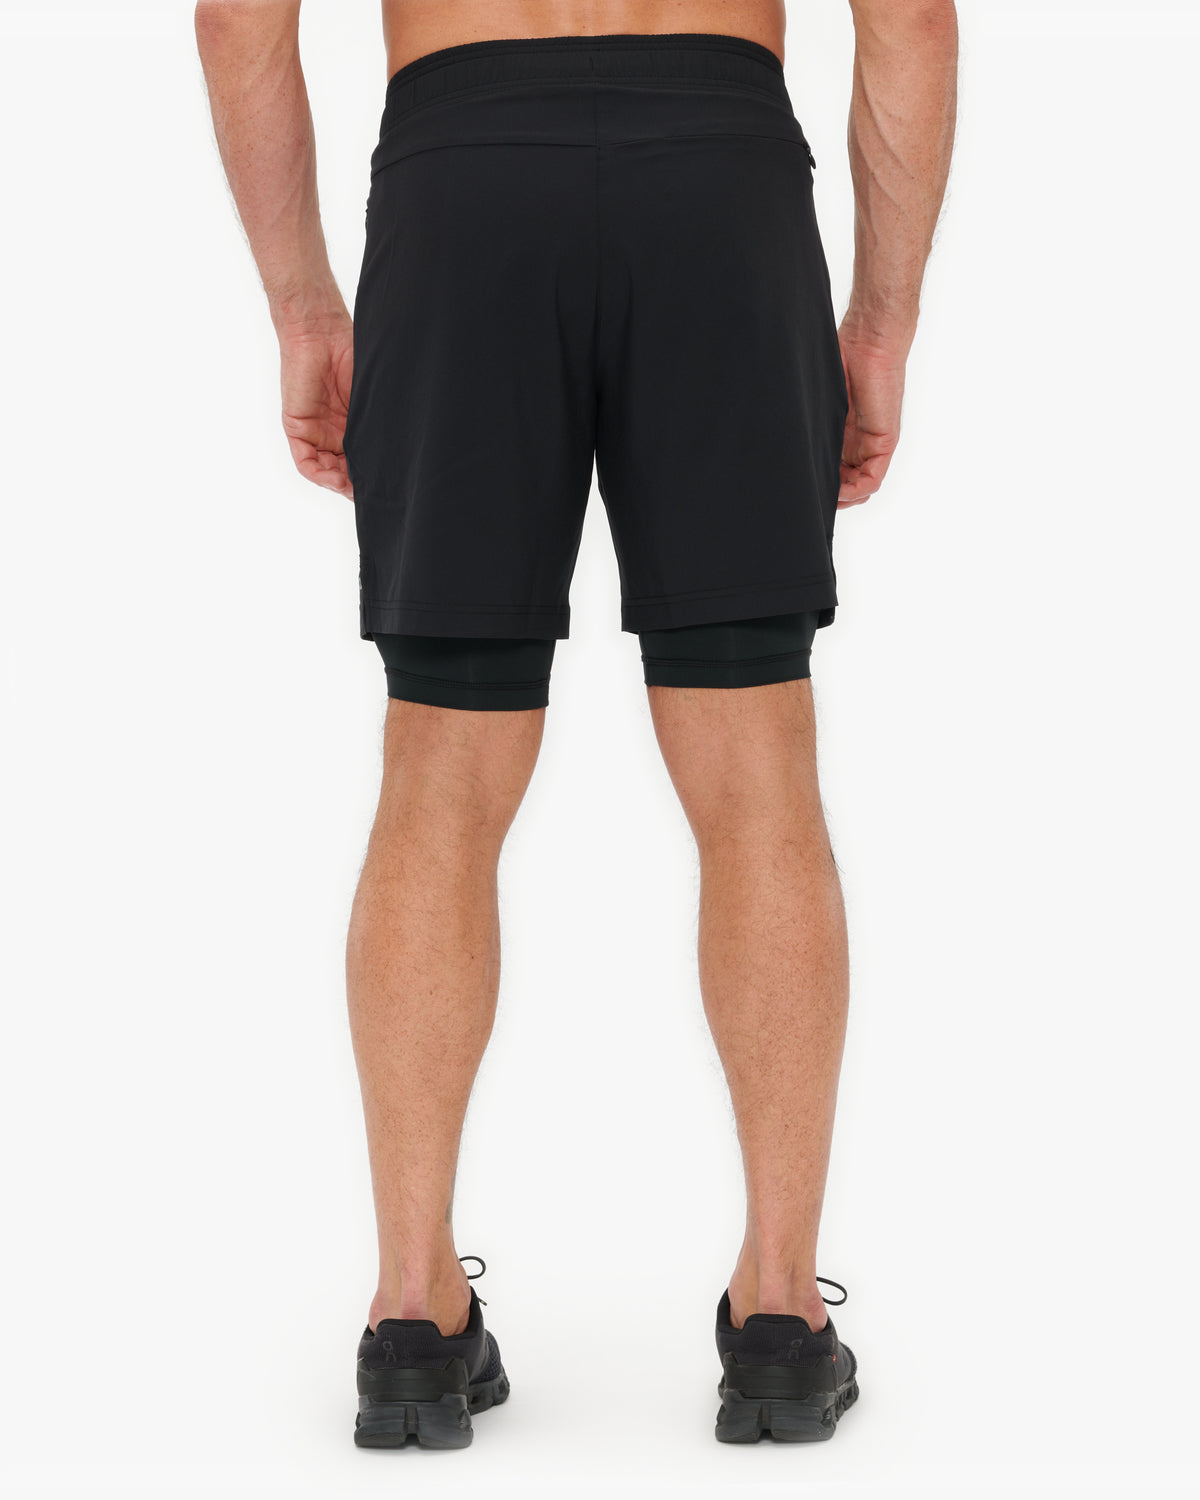 Lululemon Pace Breaker Short 5 - Lined – The Shop at Equinox